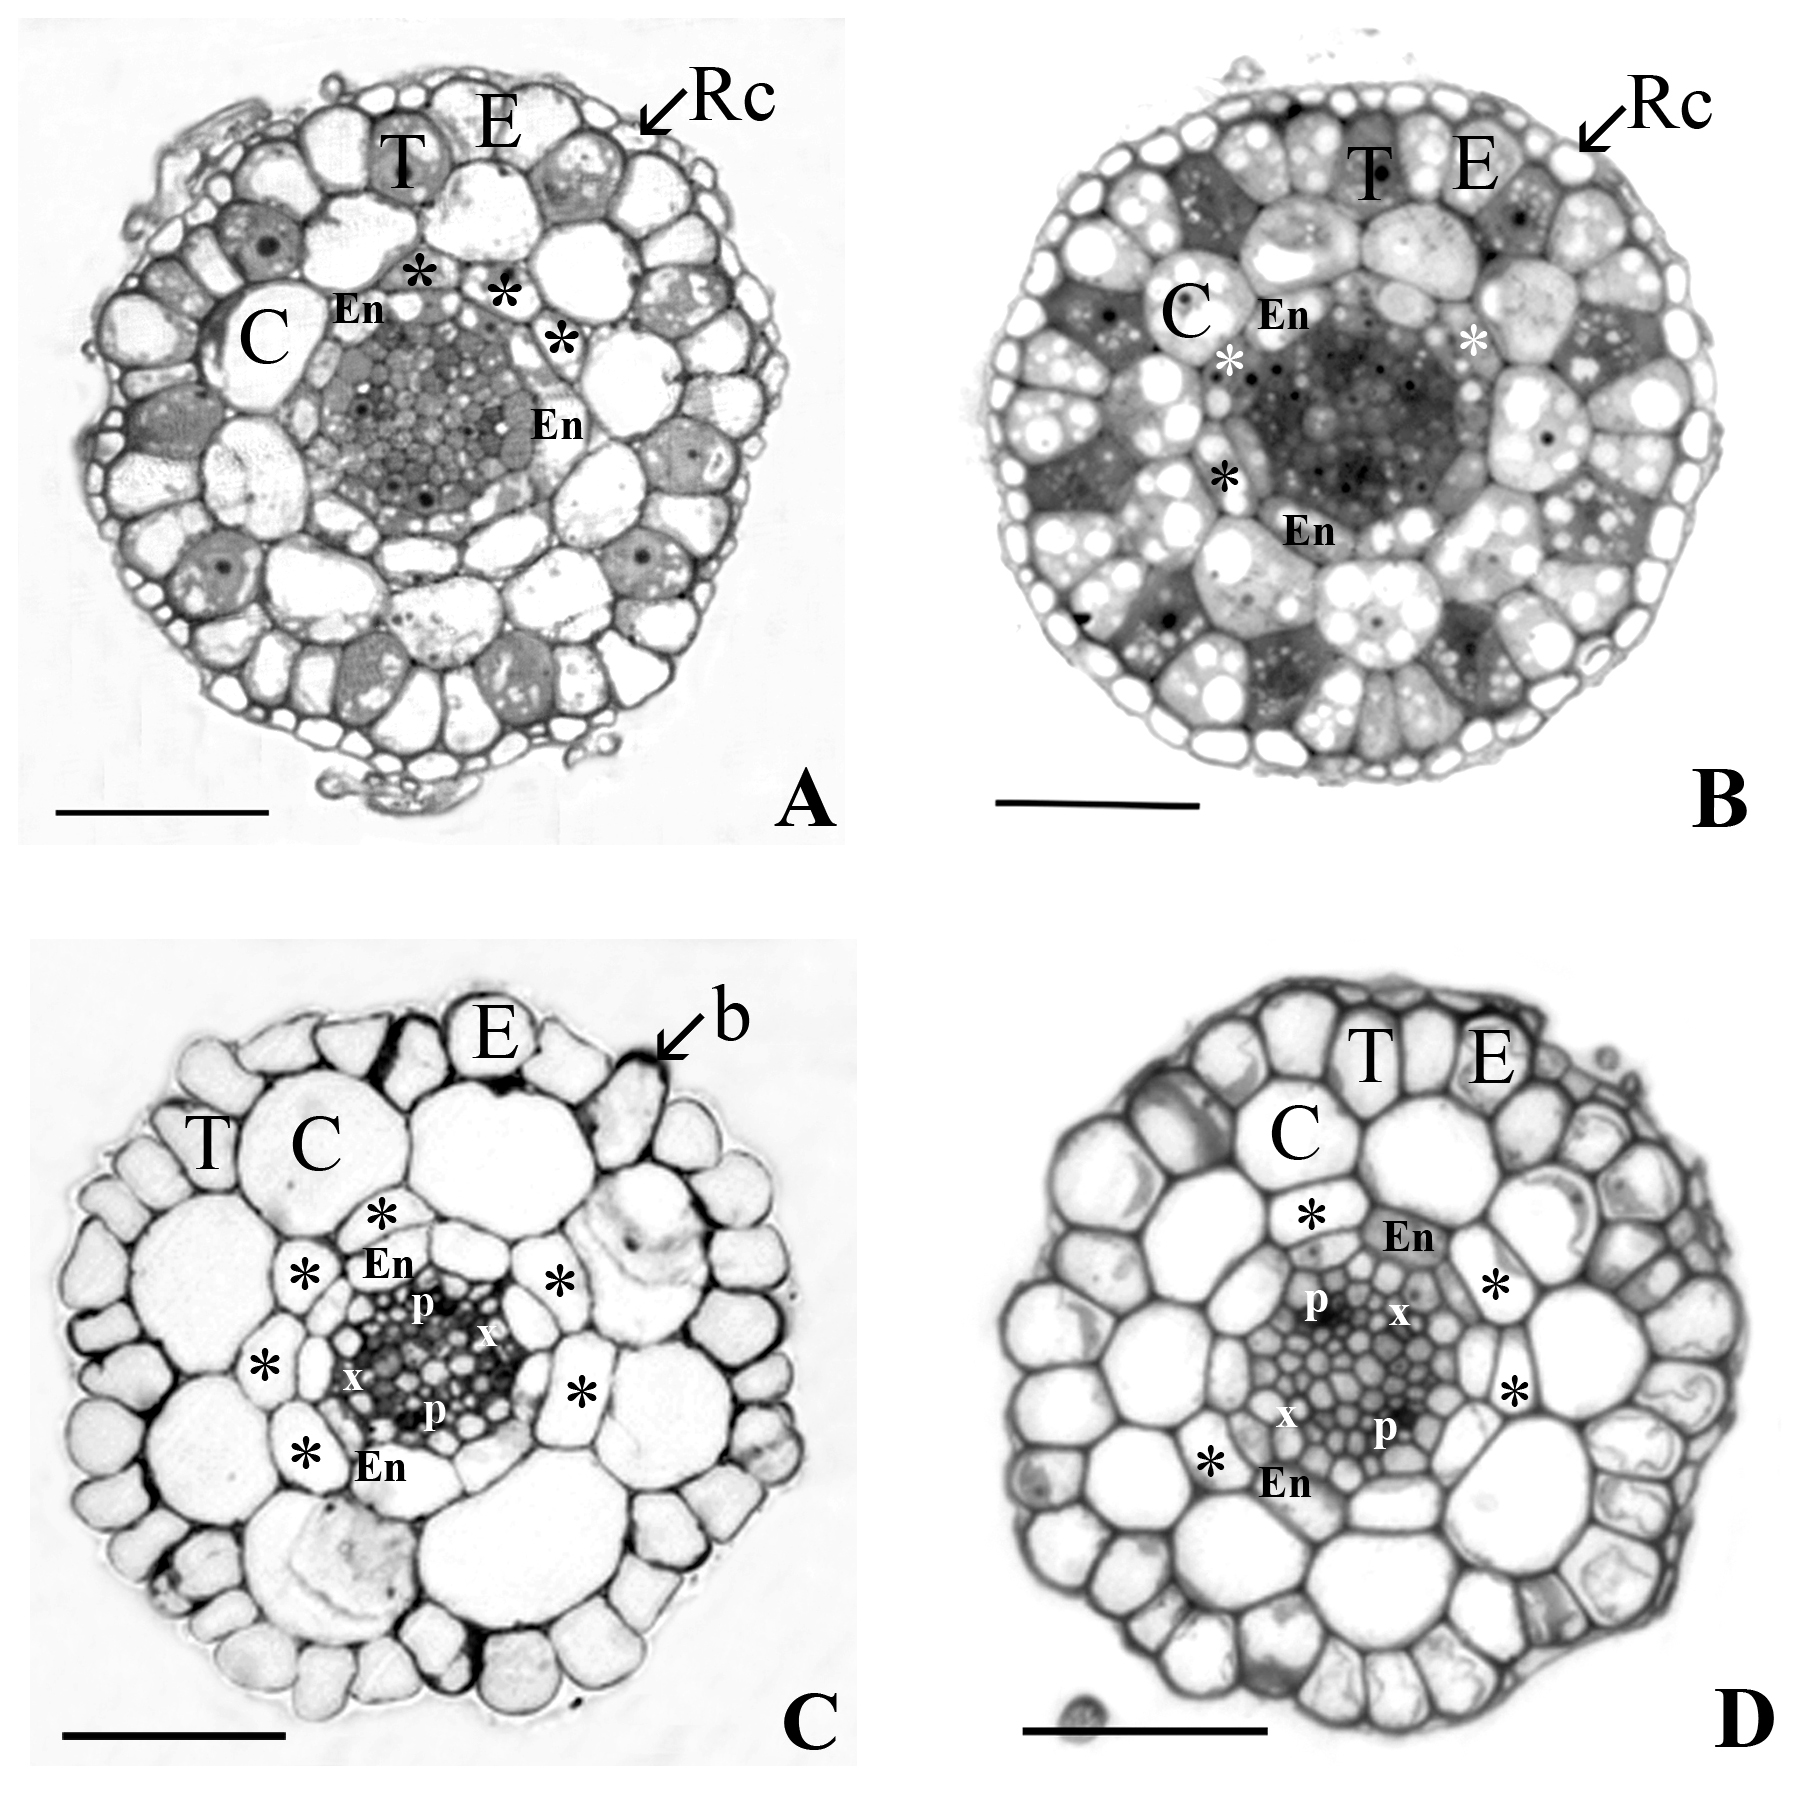 Fig. 1. Cross sections of Arabidopsis primary roots grown on agar medium with 10 µM Zn (A, B) and 1000 µM Zn (C, D). Region of undifferentiated cells in the root of A. halleri, NM population at 500 µm DFT (A), and A. halleri, M population at 300 µm DFT (B). Site of root hair emergence in the roots of A. arenosa NM population at 720 µm DFT (C) and A. halleri, M population at 600 µm DFT (D). Note the middle cortex (MC) cells (asterisks). b – bulge; C – cortex; E – epidermis; En – endodermis; p – phloem pole; Rc – root cap cells; T – trichoblast; x – xylem pole. Bars represent 0.05 mm.